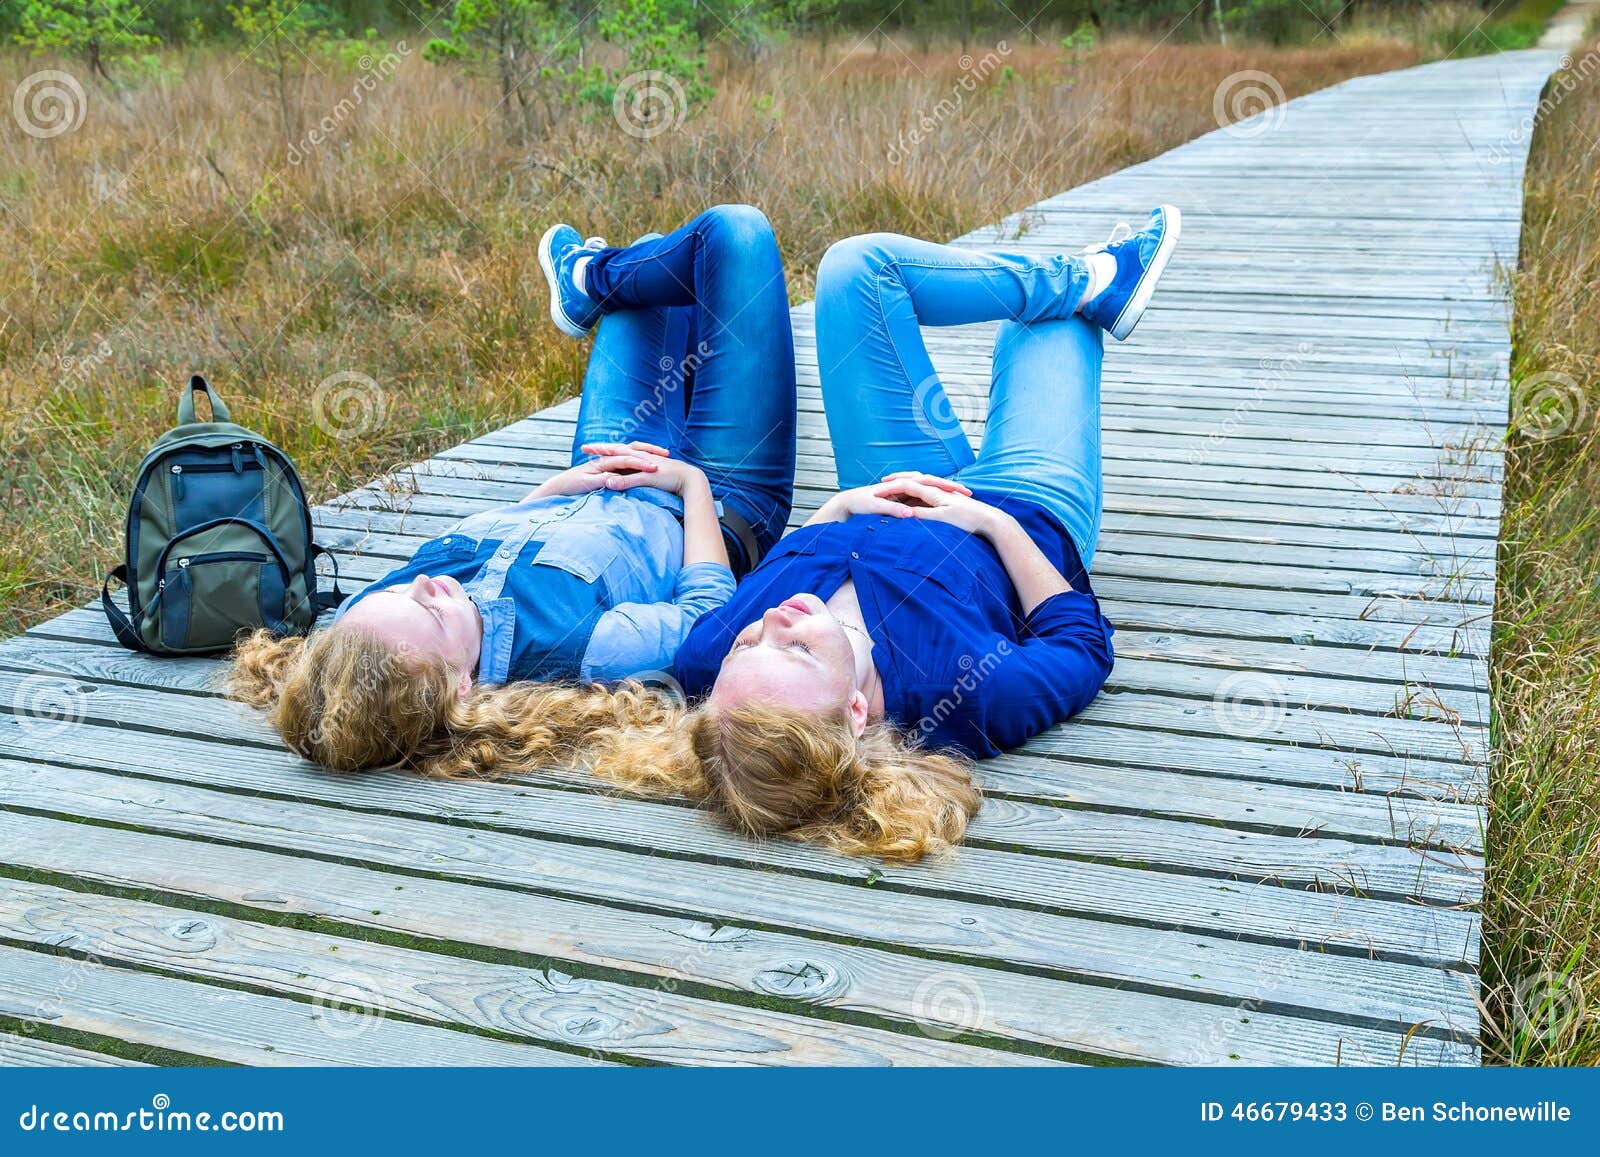 two girls lying on their backs in nature